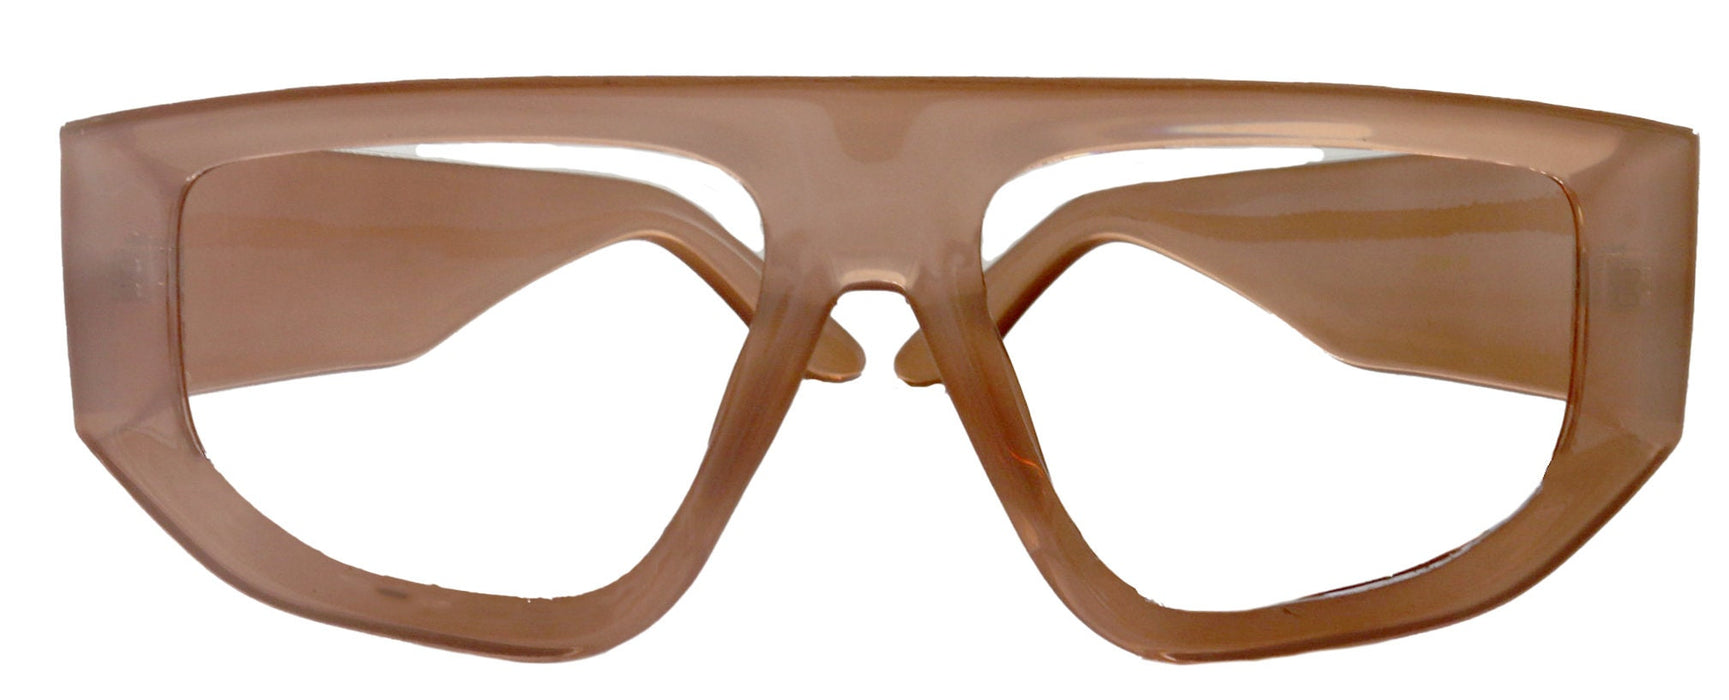 Goliath High End Bifocal or Non-Bifocal Brown Reading Glasses Square, Inspired by NY Fifth Avenue